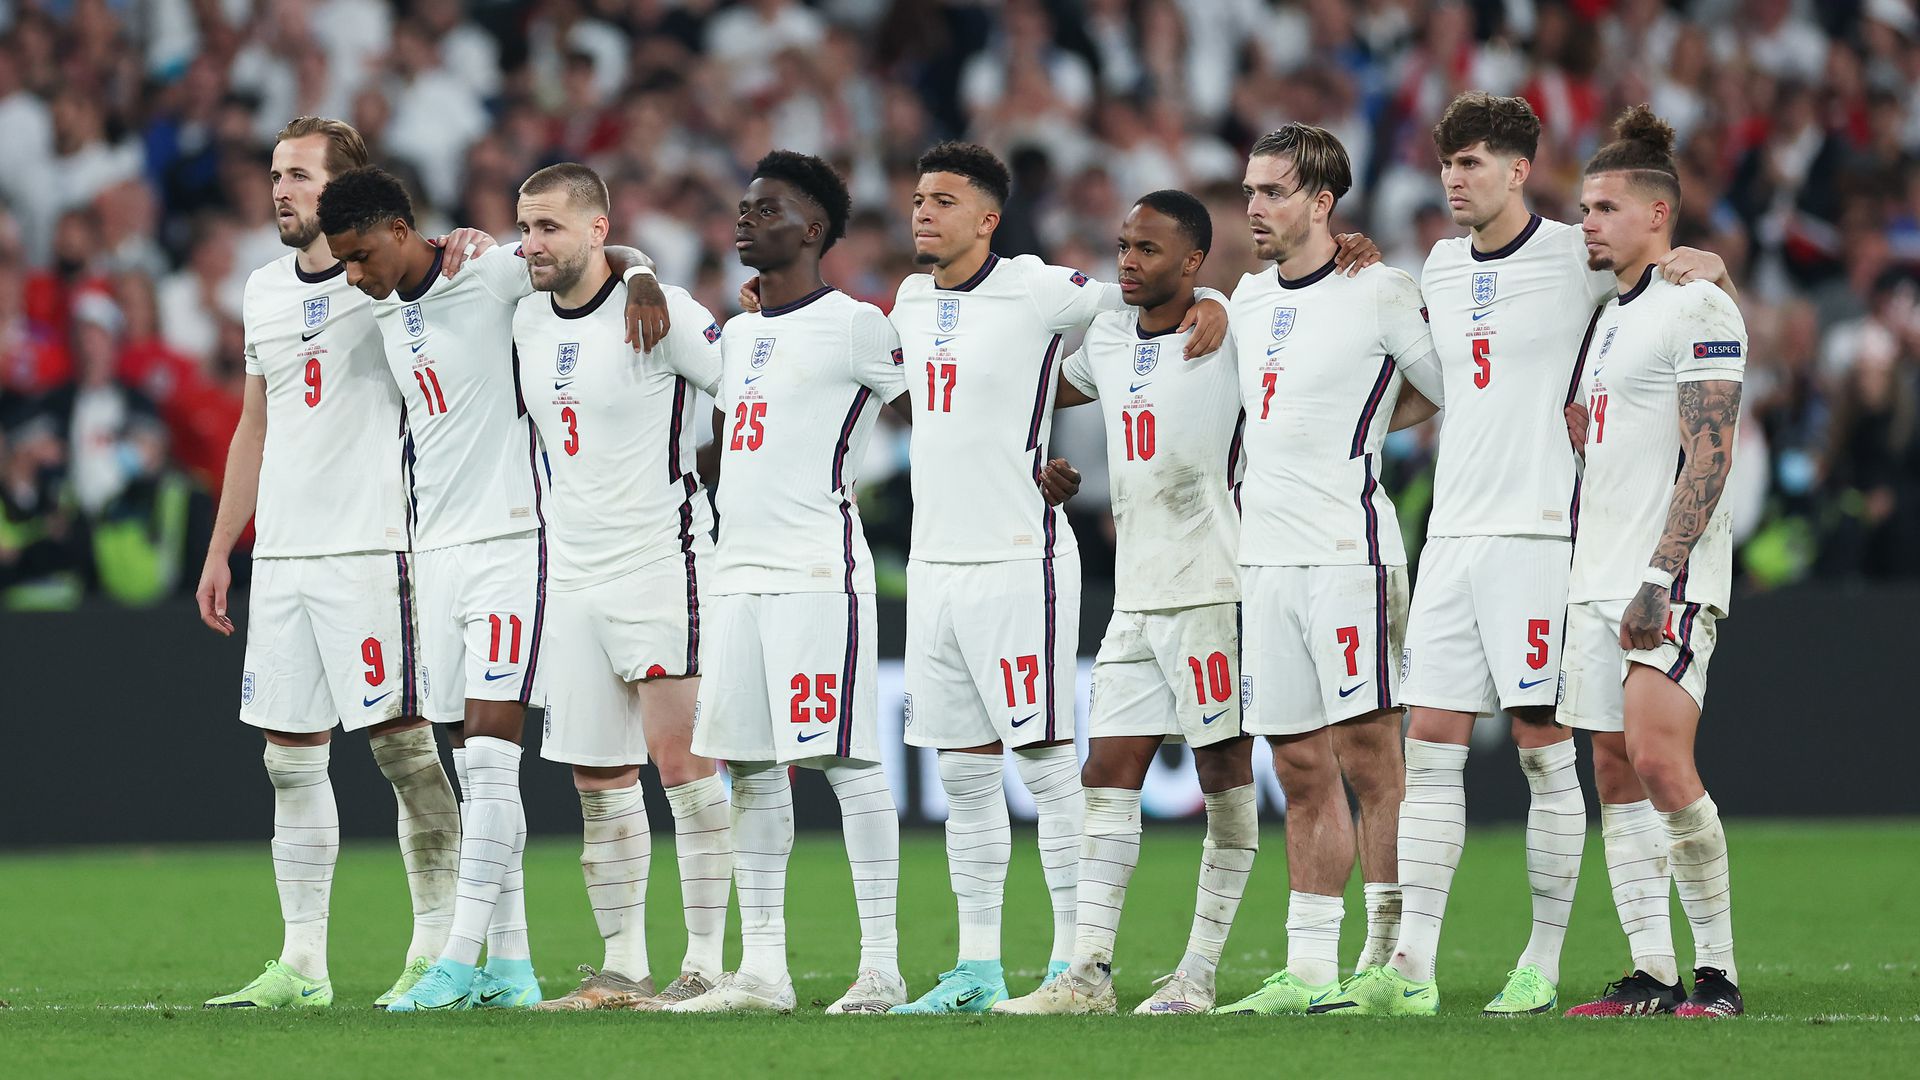 England players hit by racist abuse after Euro final loss: FA appalled